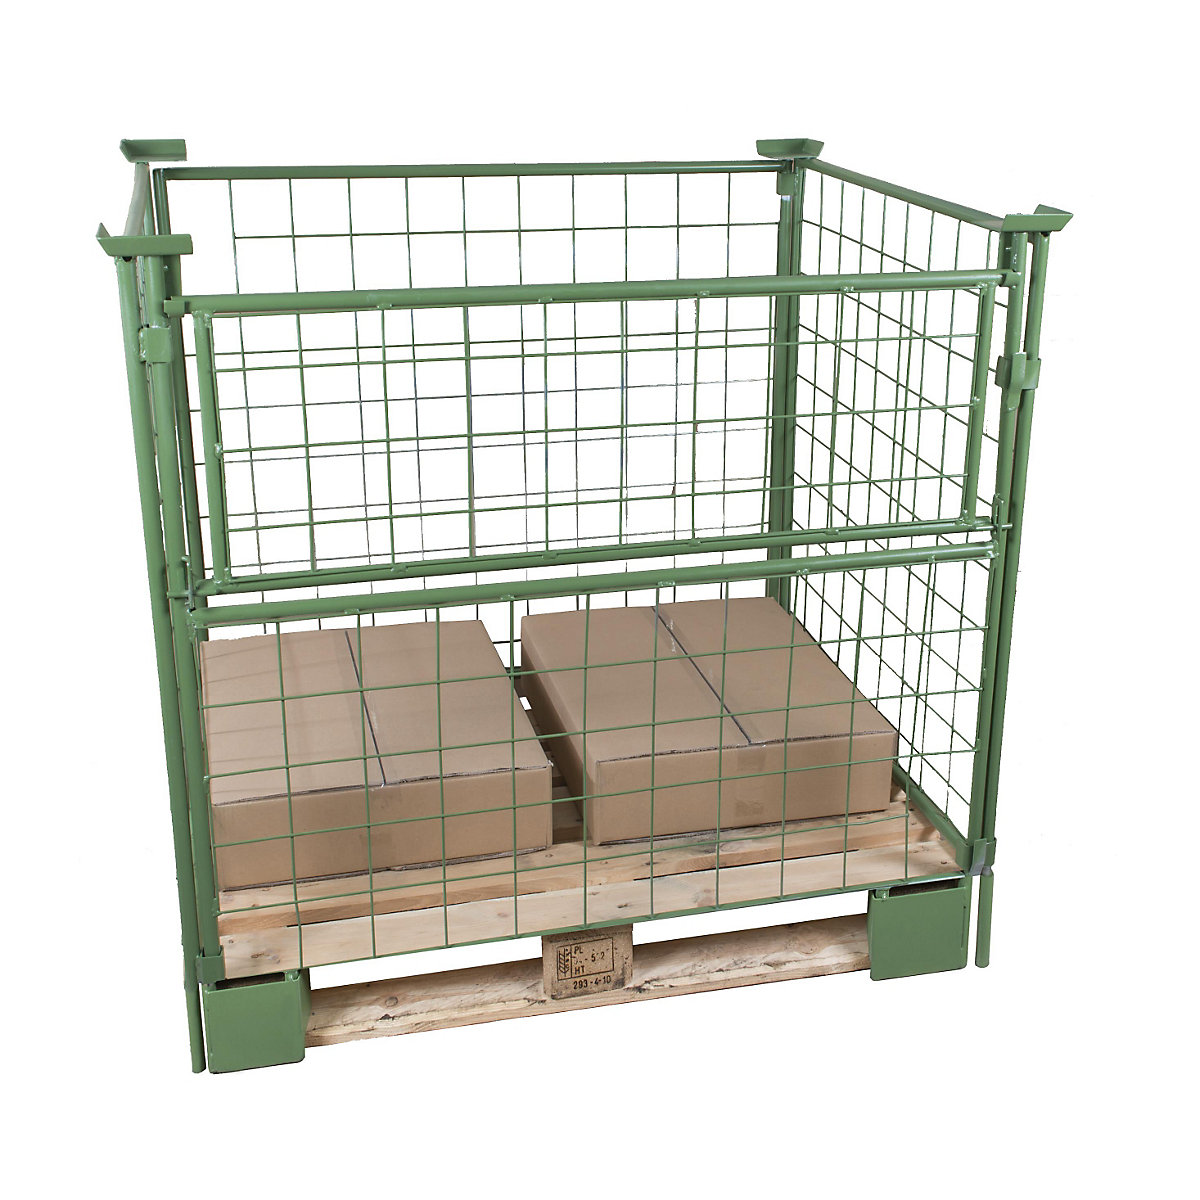 Pallet frame, effective height 1200 mm, for attaching, WxL 800 x 1200 mm, 1 long side can be half folded-1